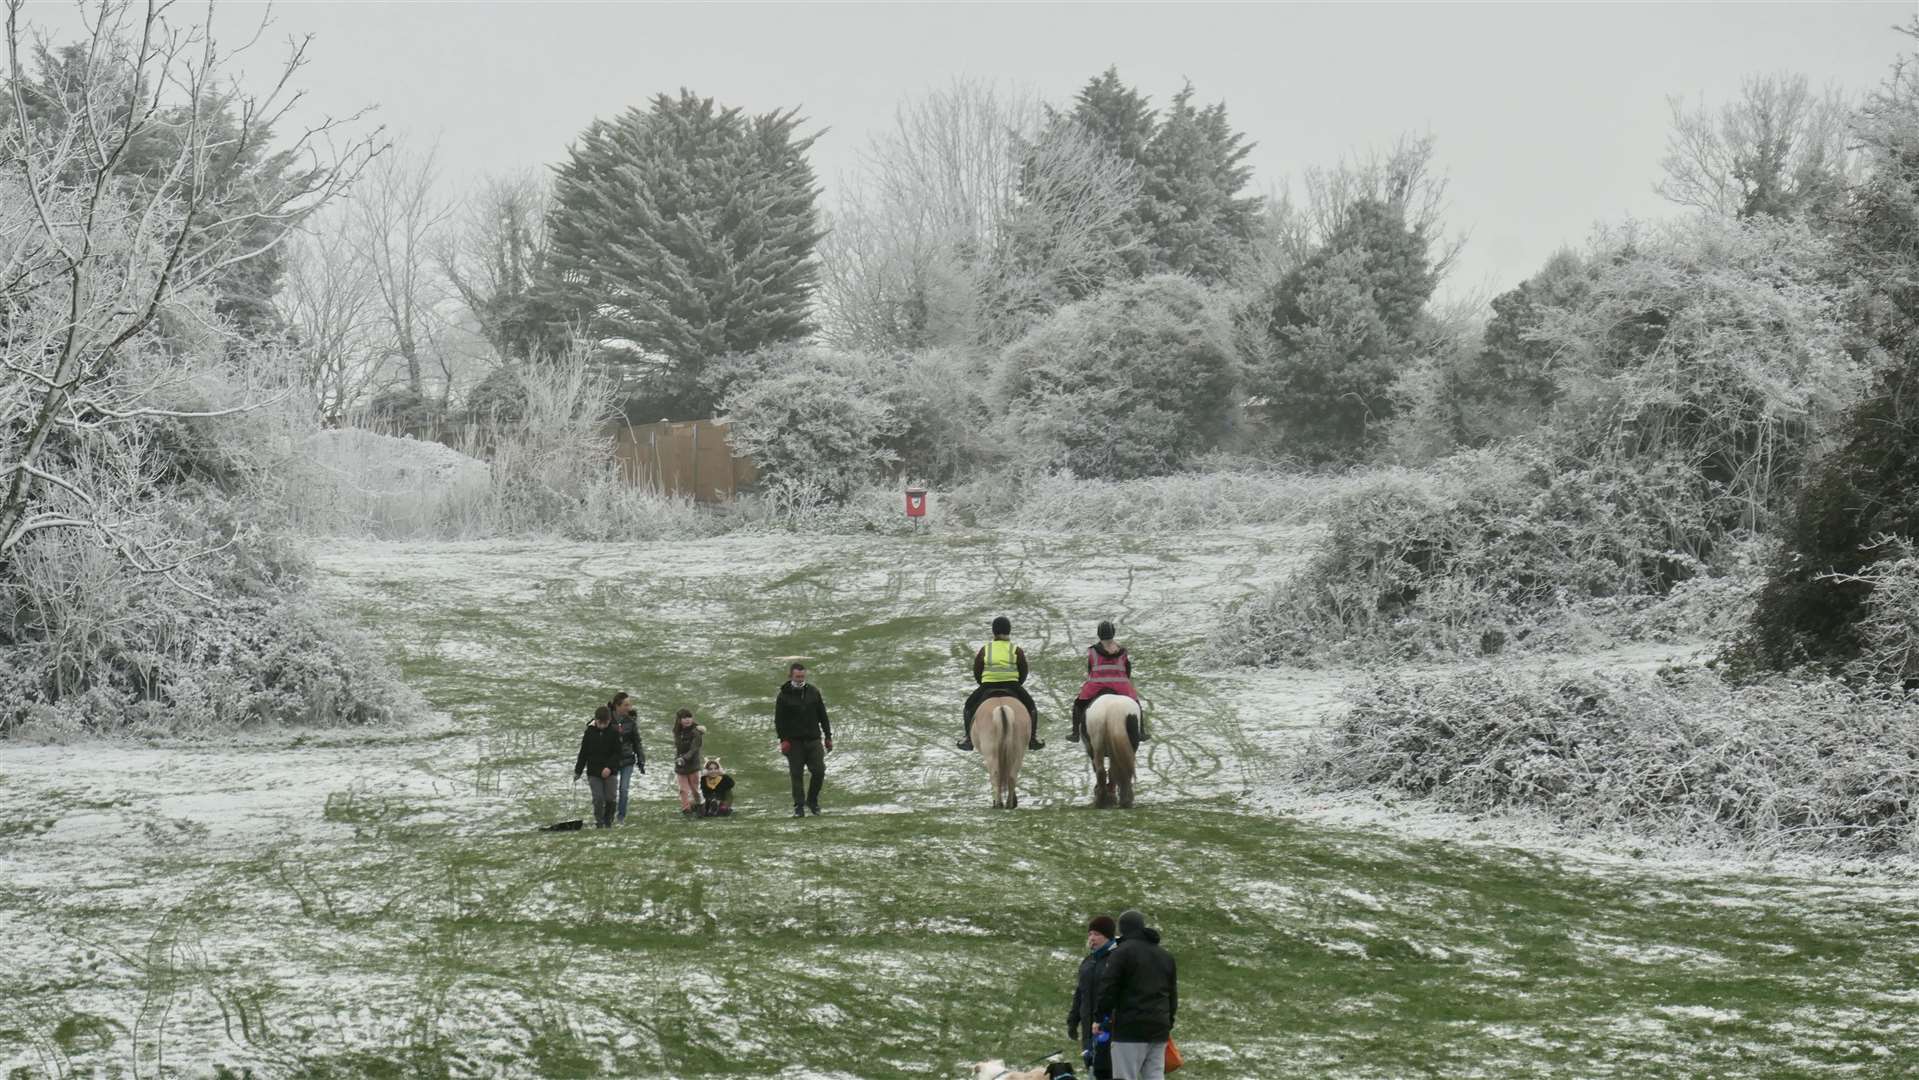 Sunday snow: definitely, says photographer Barry Hollis who took this shot at The Glen, Minster